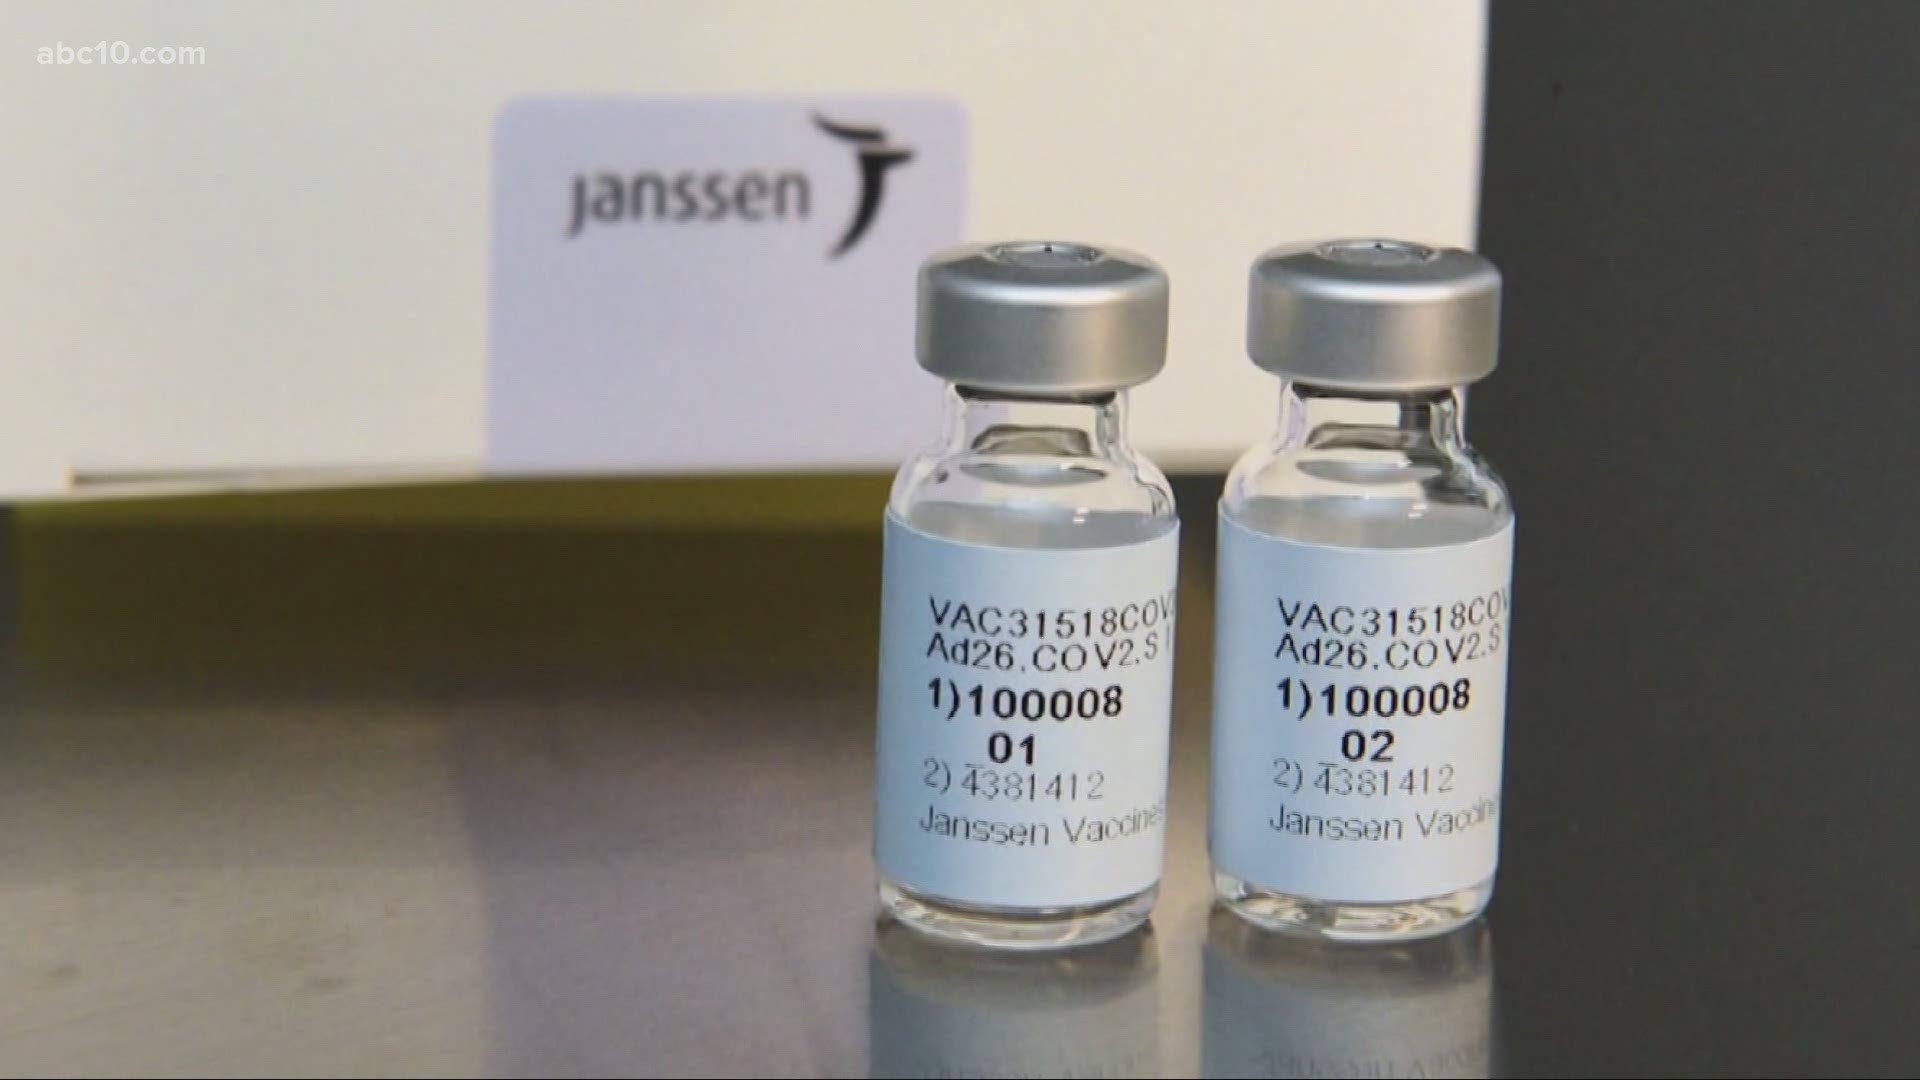 The new single-dose vaccine will allow California to get the COVID-19 vaccine to people who are less able to get to a vaccine clinic.